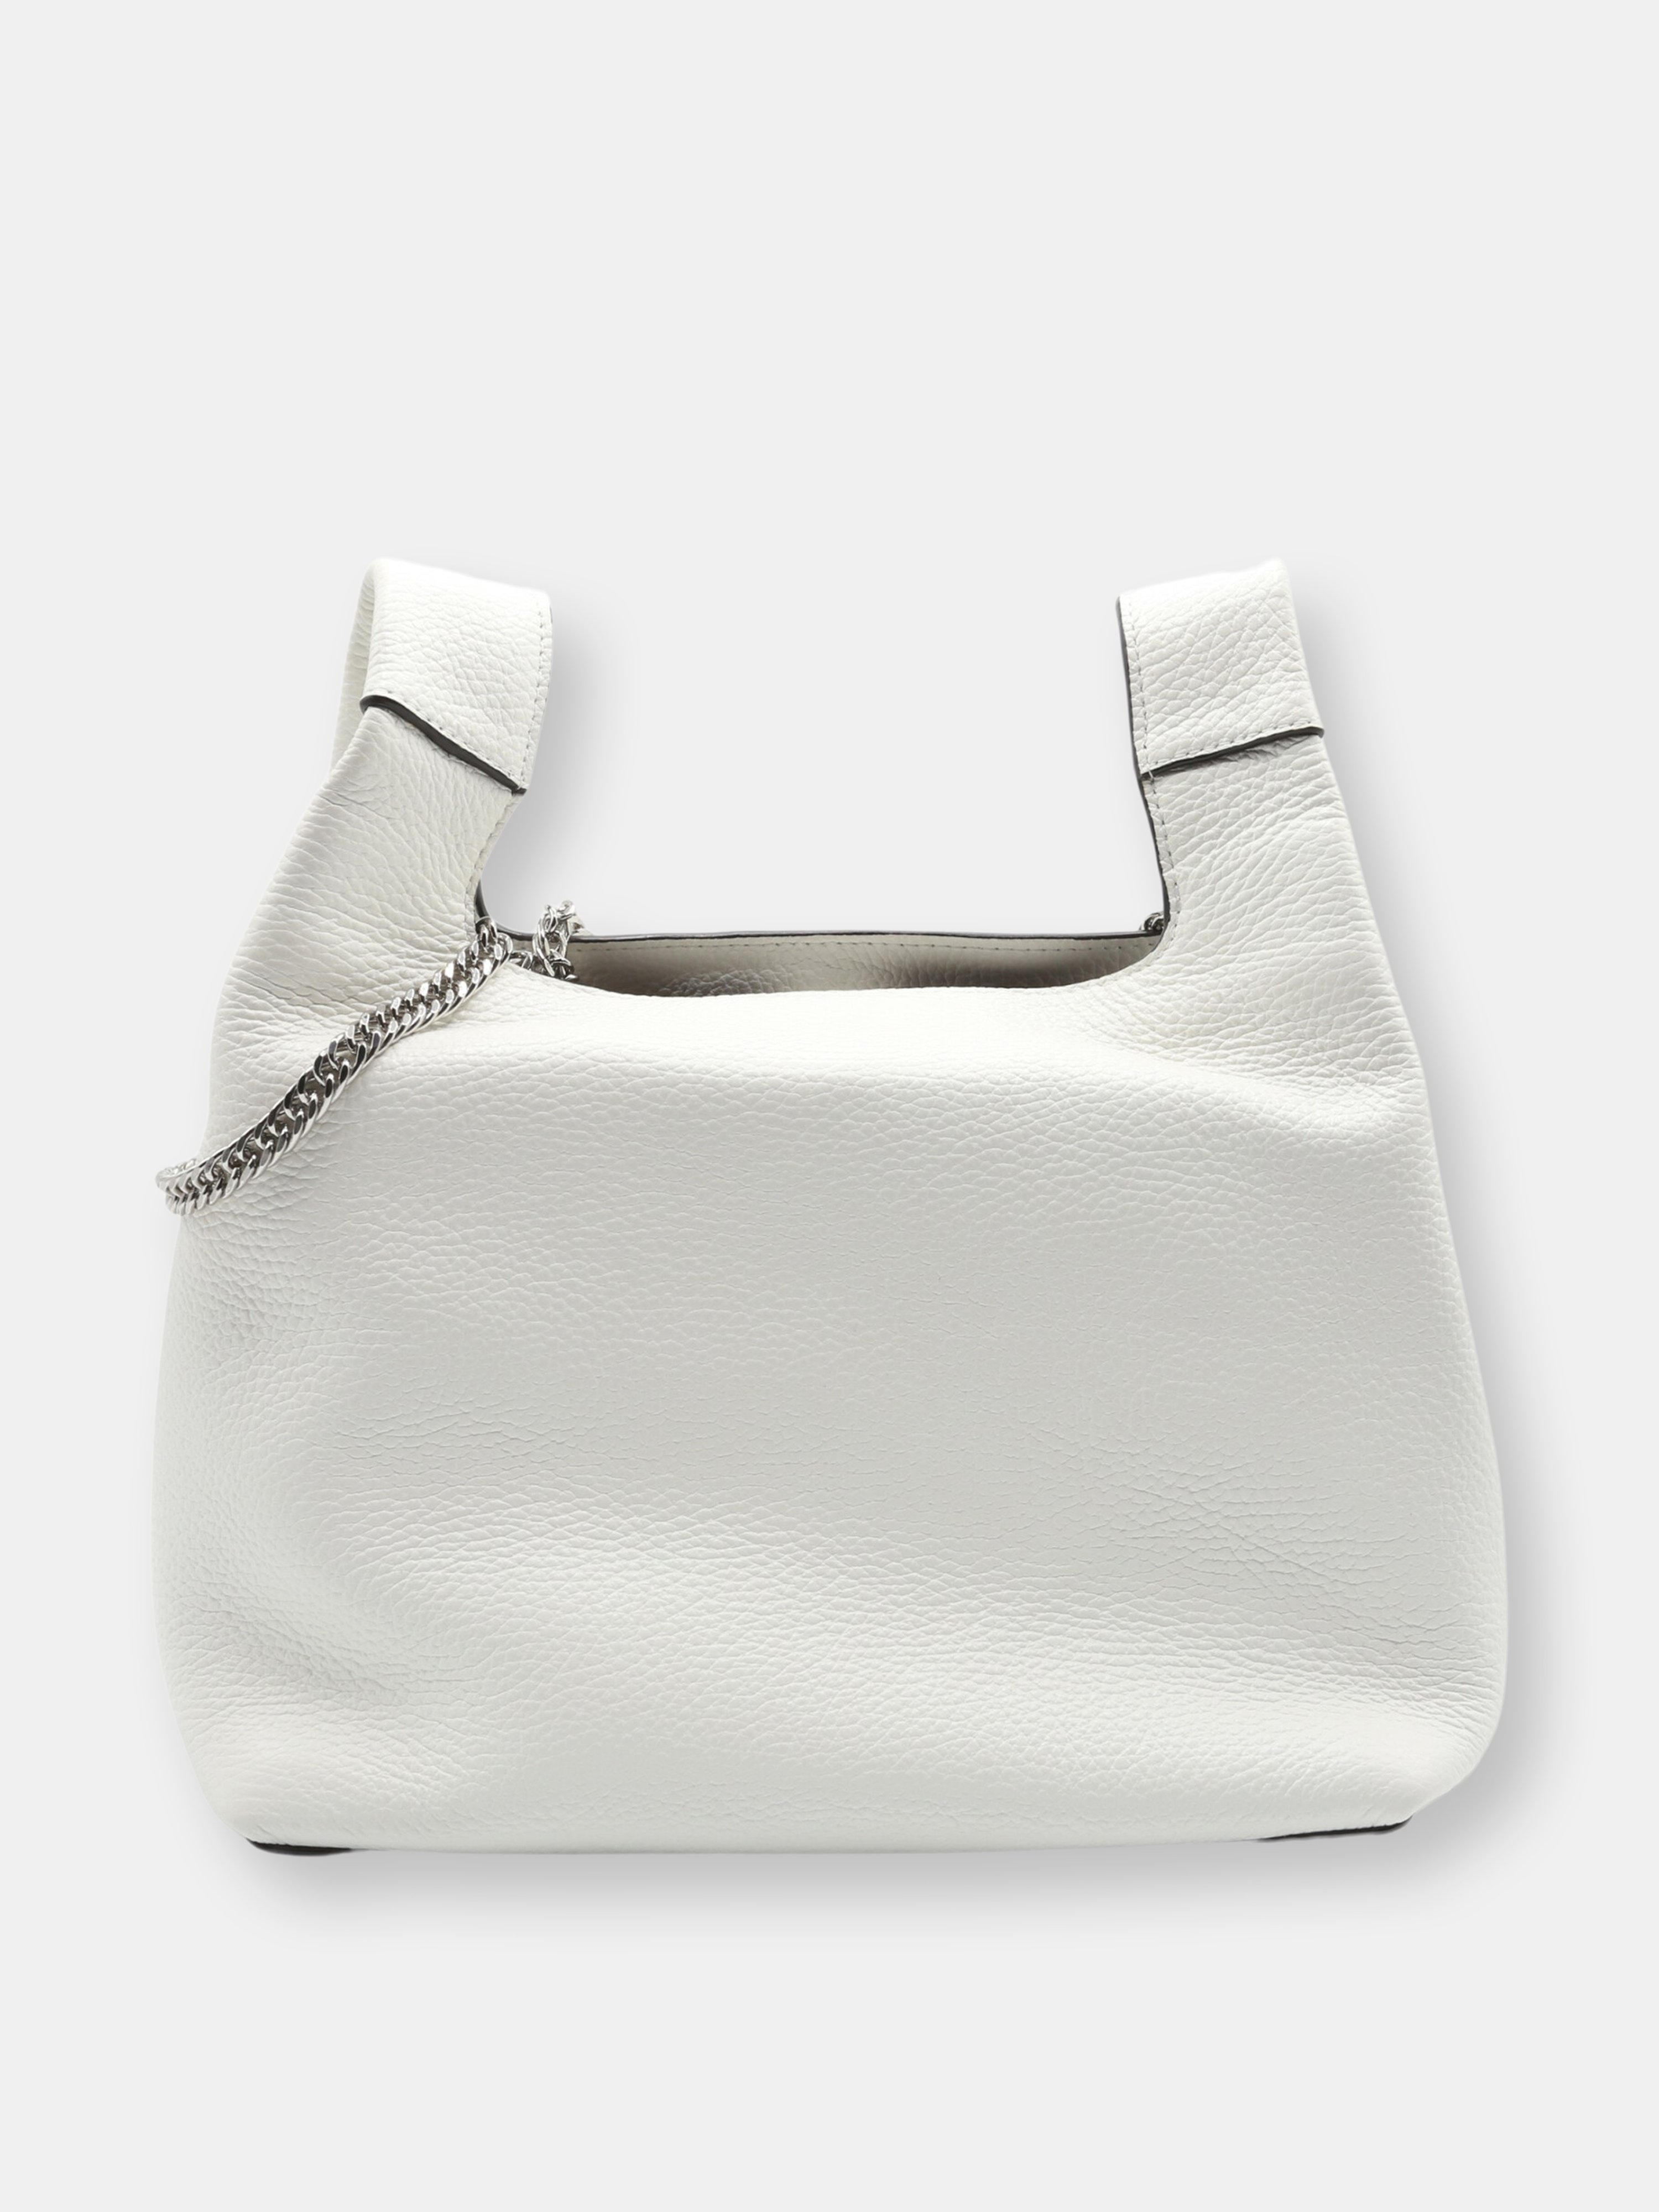 Hayward Women's Chain Leather Top Handle Bag Top-handle In White